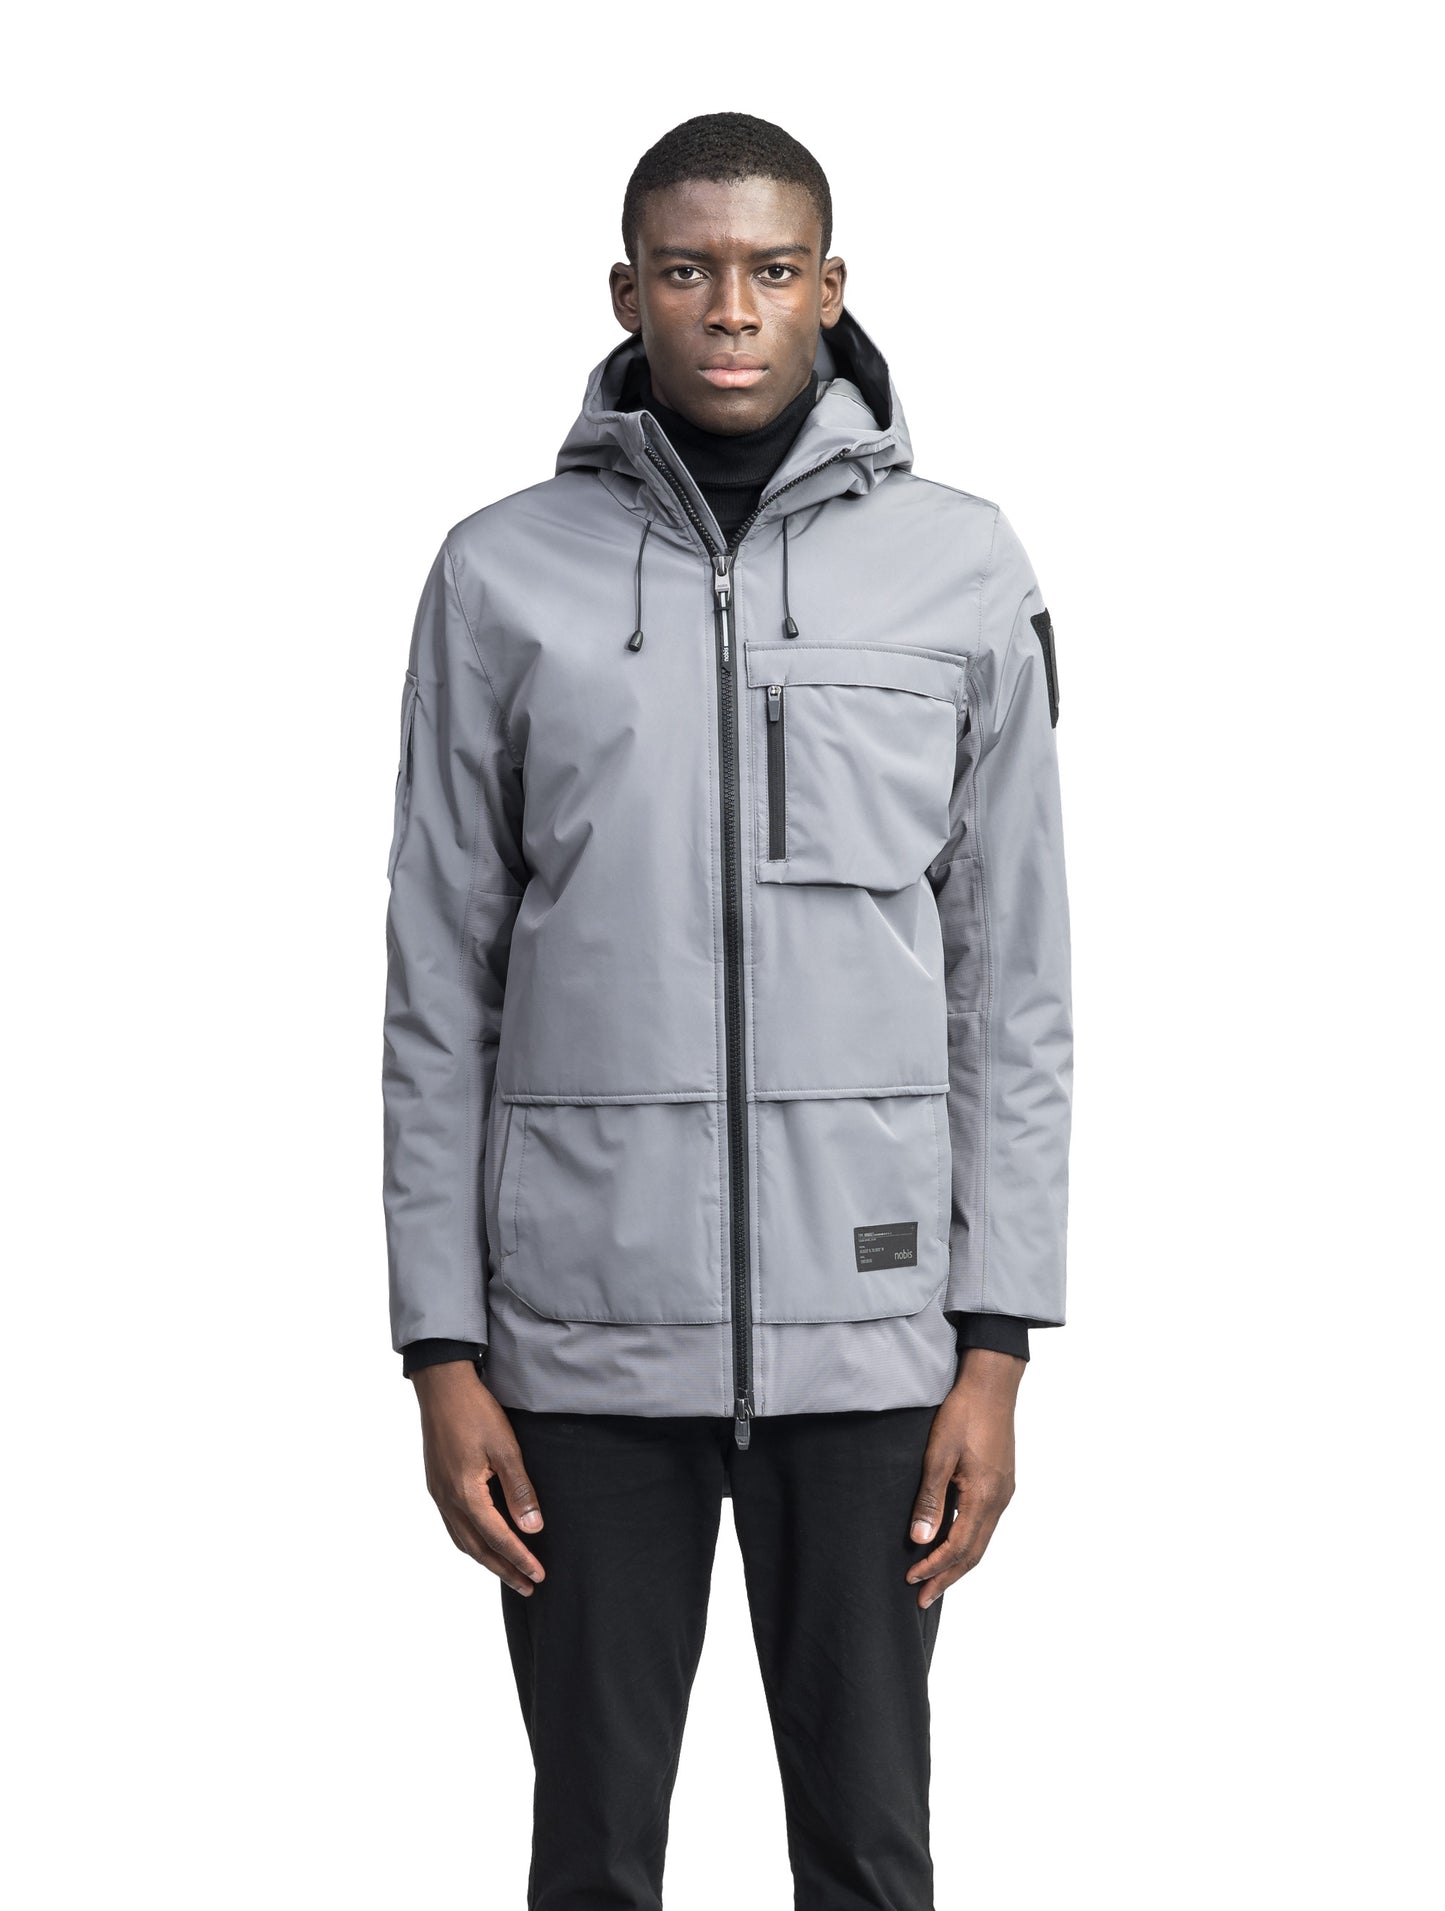 Rains® W Alta Puffer Parka in Black for $680 | Free Shipping